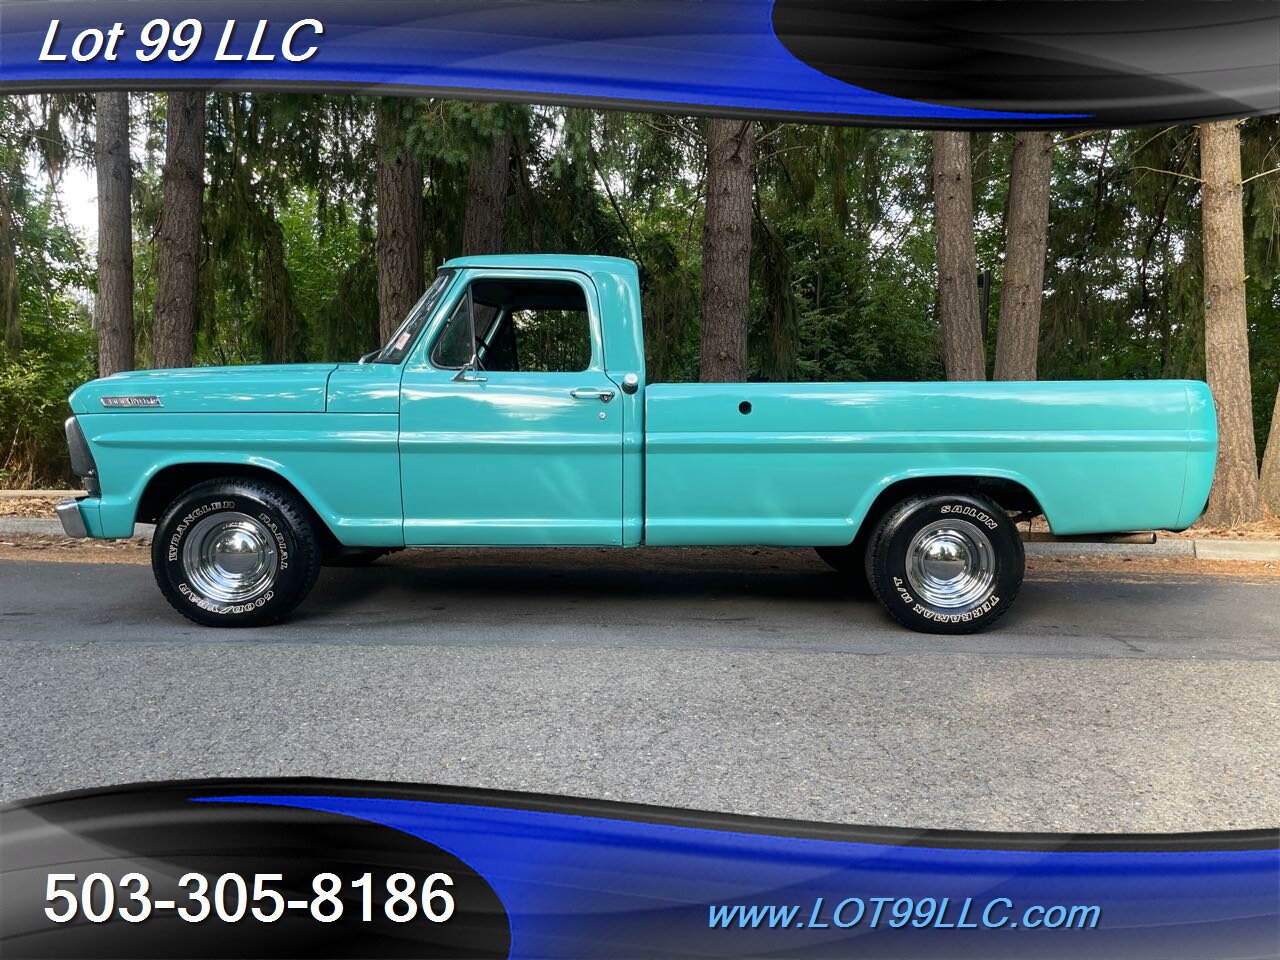 1967 Ford F-100 302 V8  Long Bed No Rust Solid Truck   - Photo 1 - Milwaukie, OR 97267